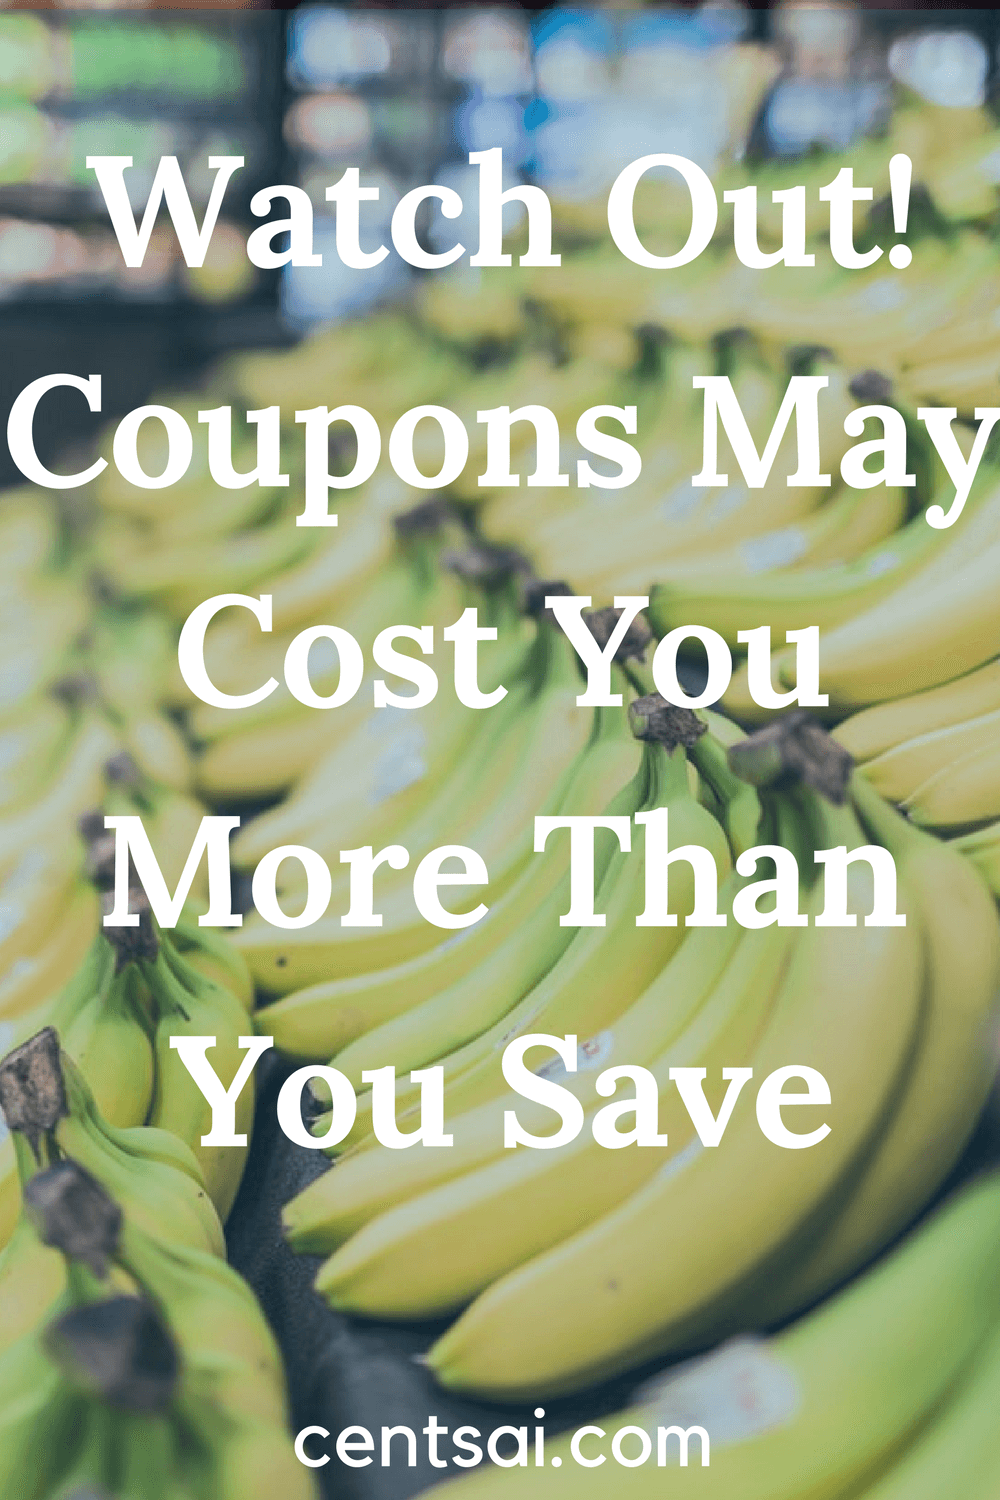 Watch Out! Coupons May Cost You More Than You Save